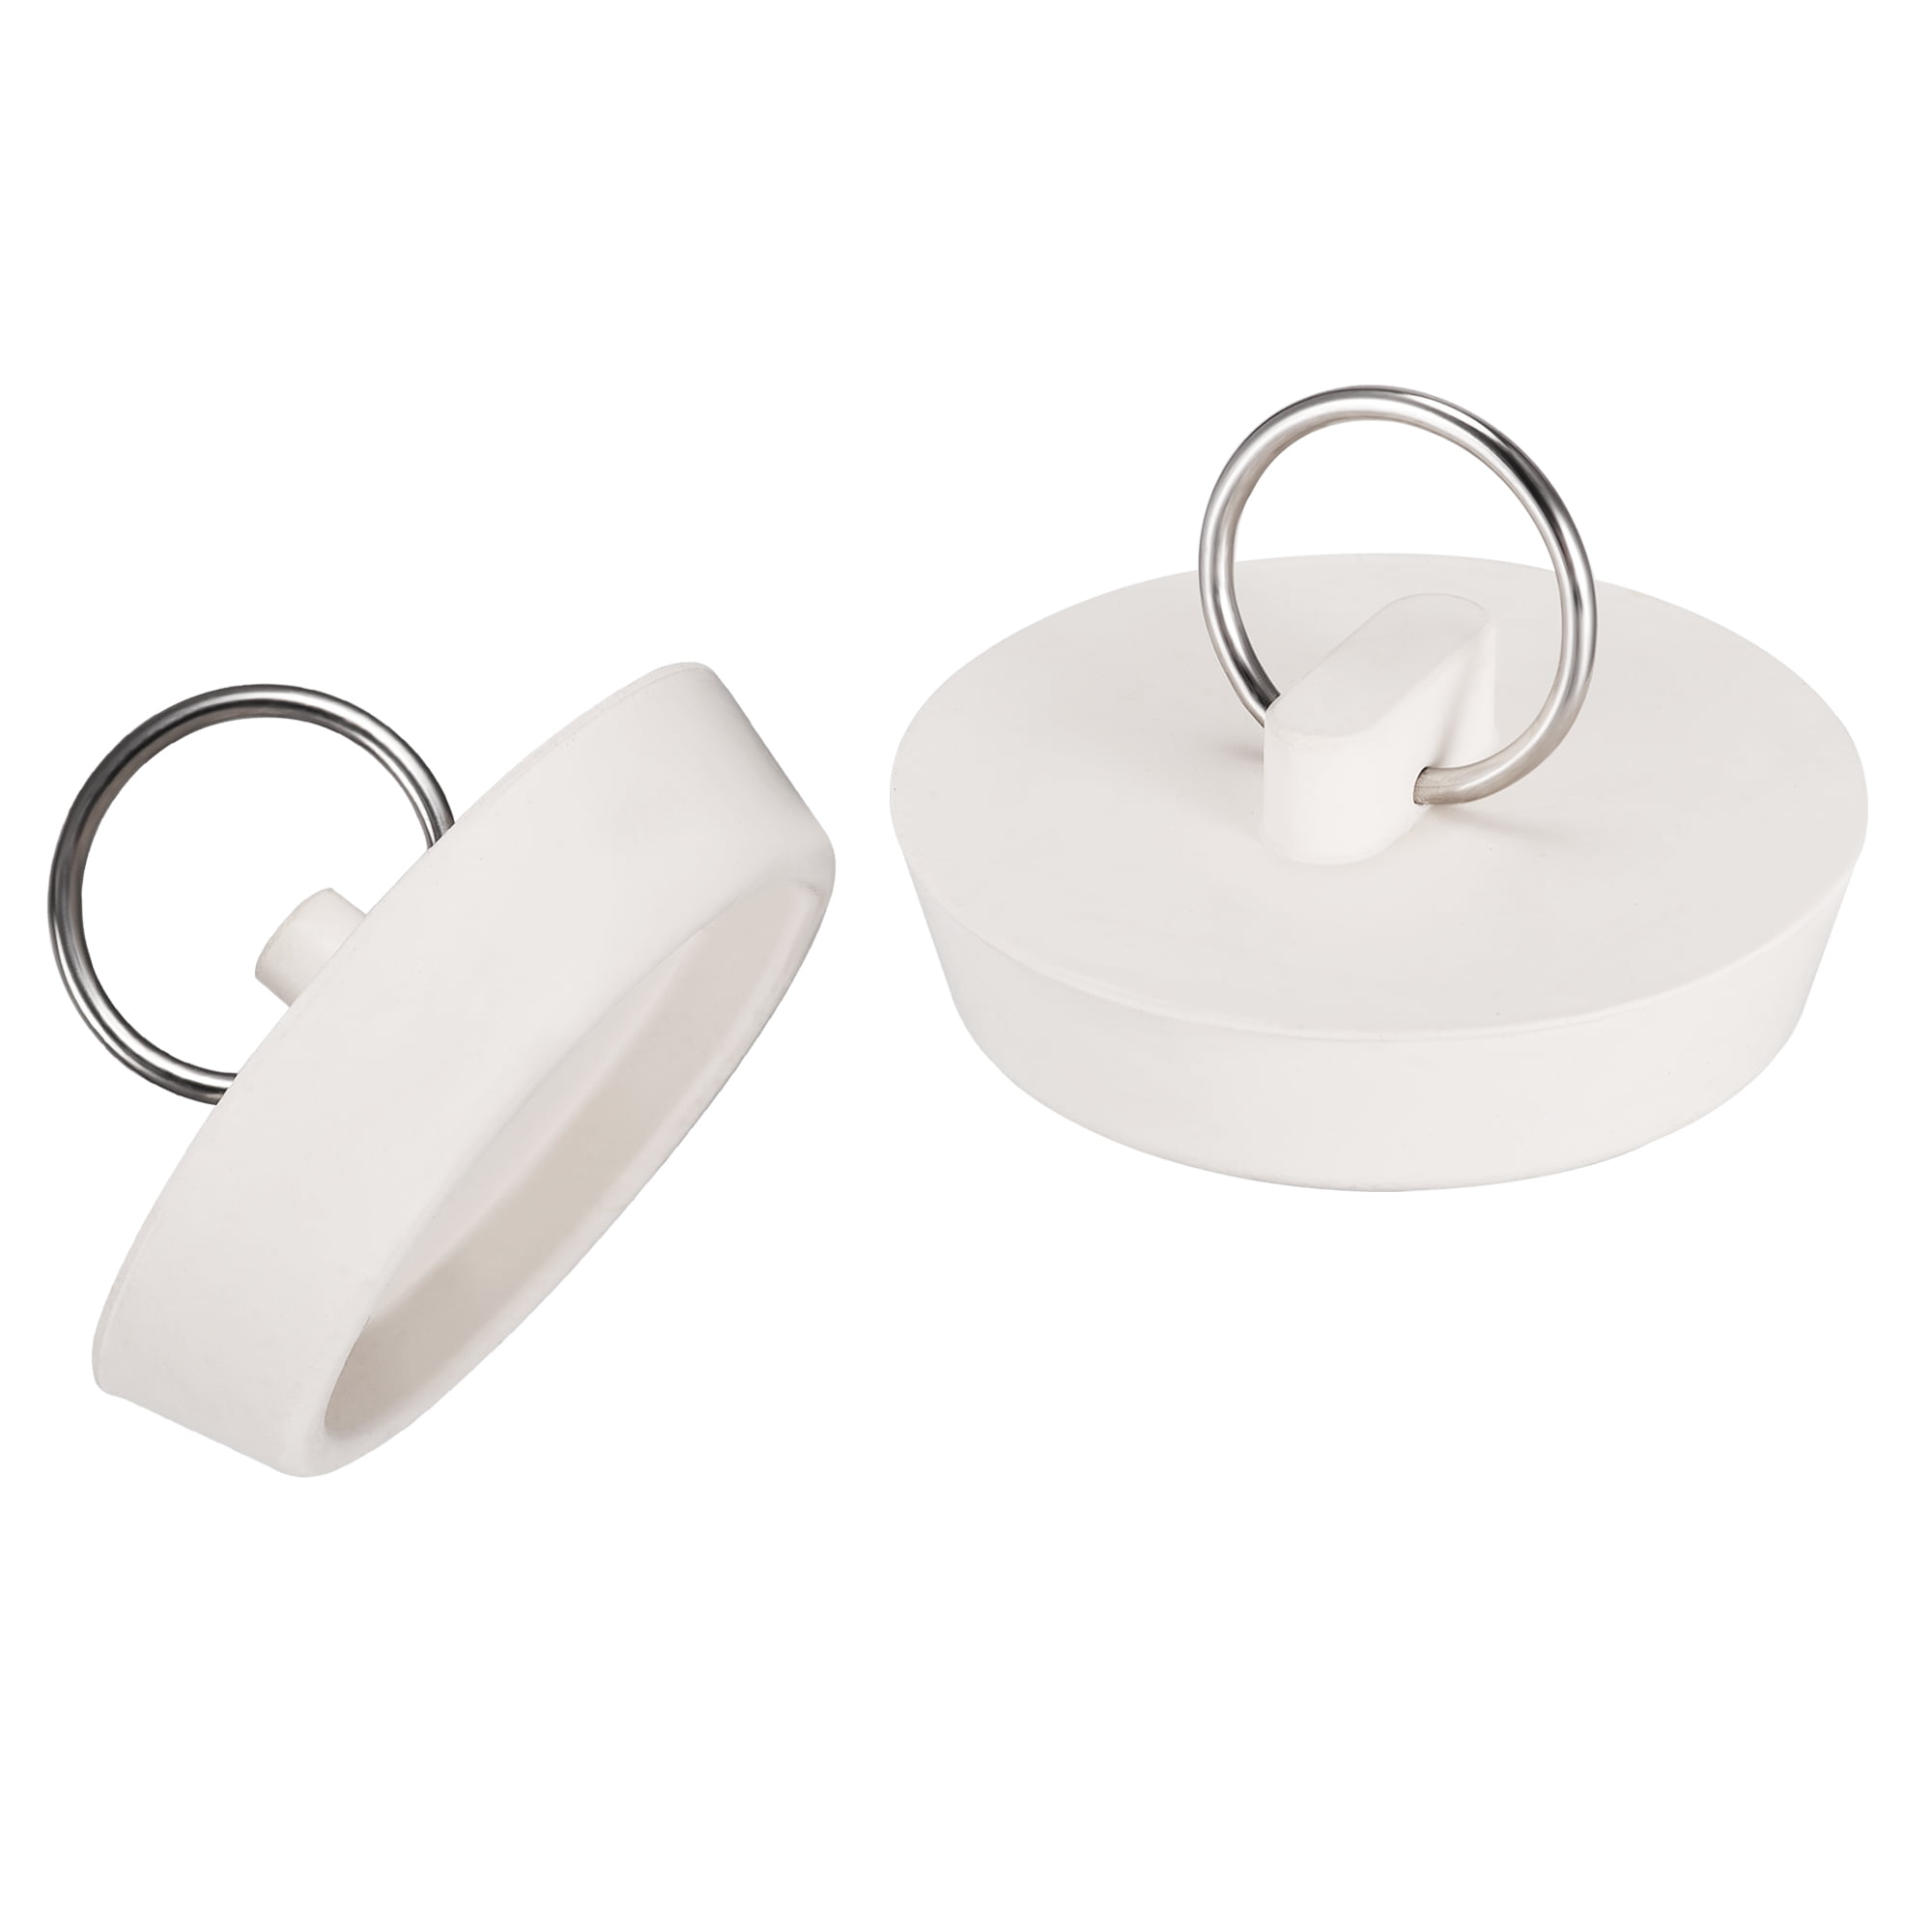 2 Pcs Drain Stopper Set Kitchen and Bathroom Bath Plugs Sink Plug Rubber with Hanging Ring for Bathtub